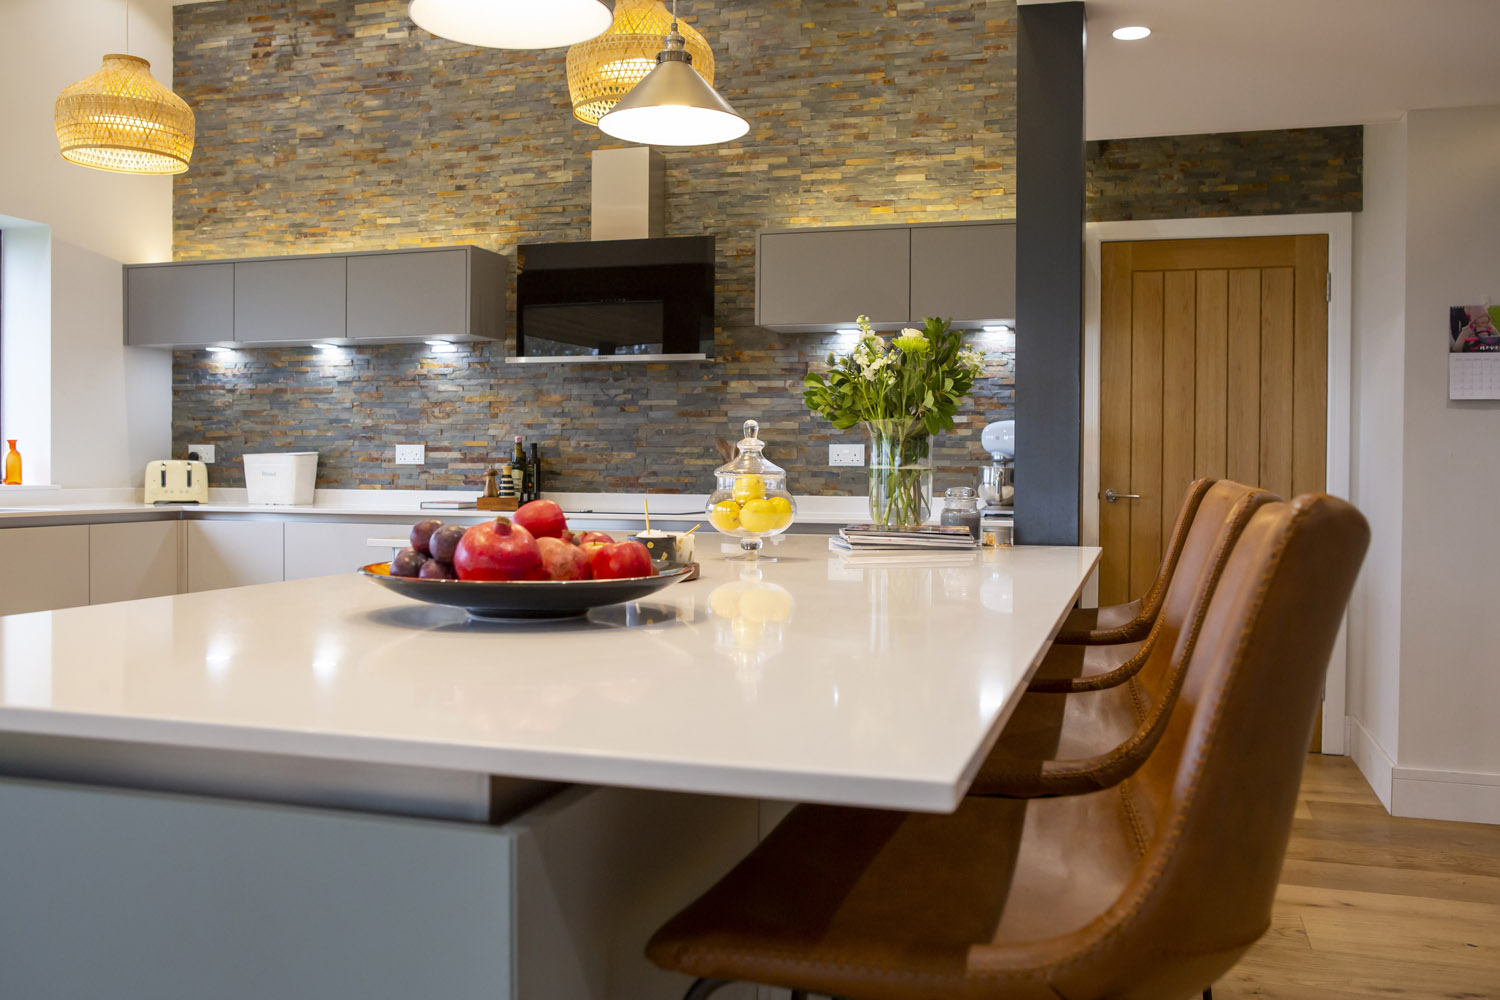 Kitchen island in modern barn conversion Crown Imperial fitted kitchens designed by Gardiner Haskins